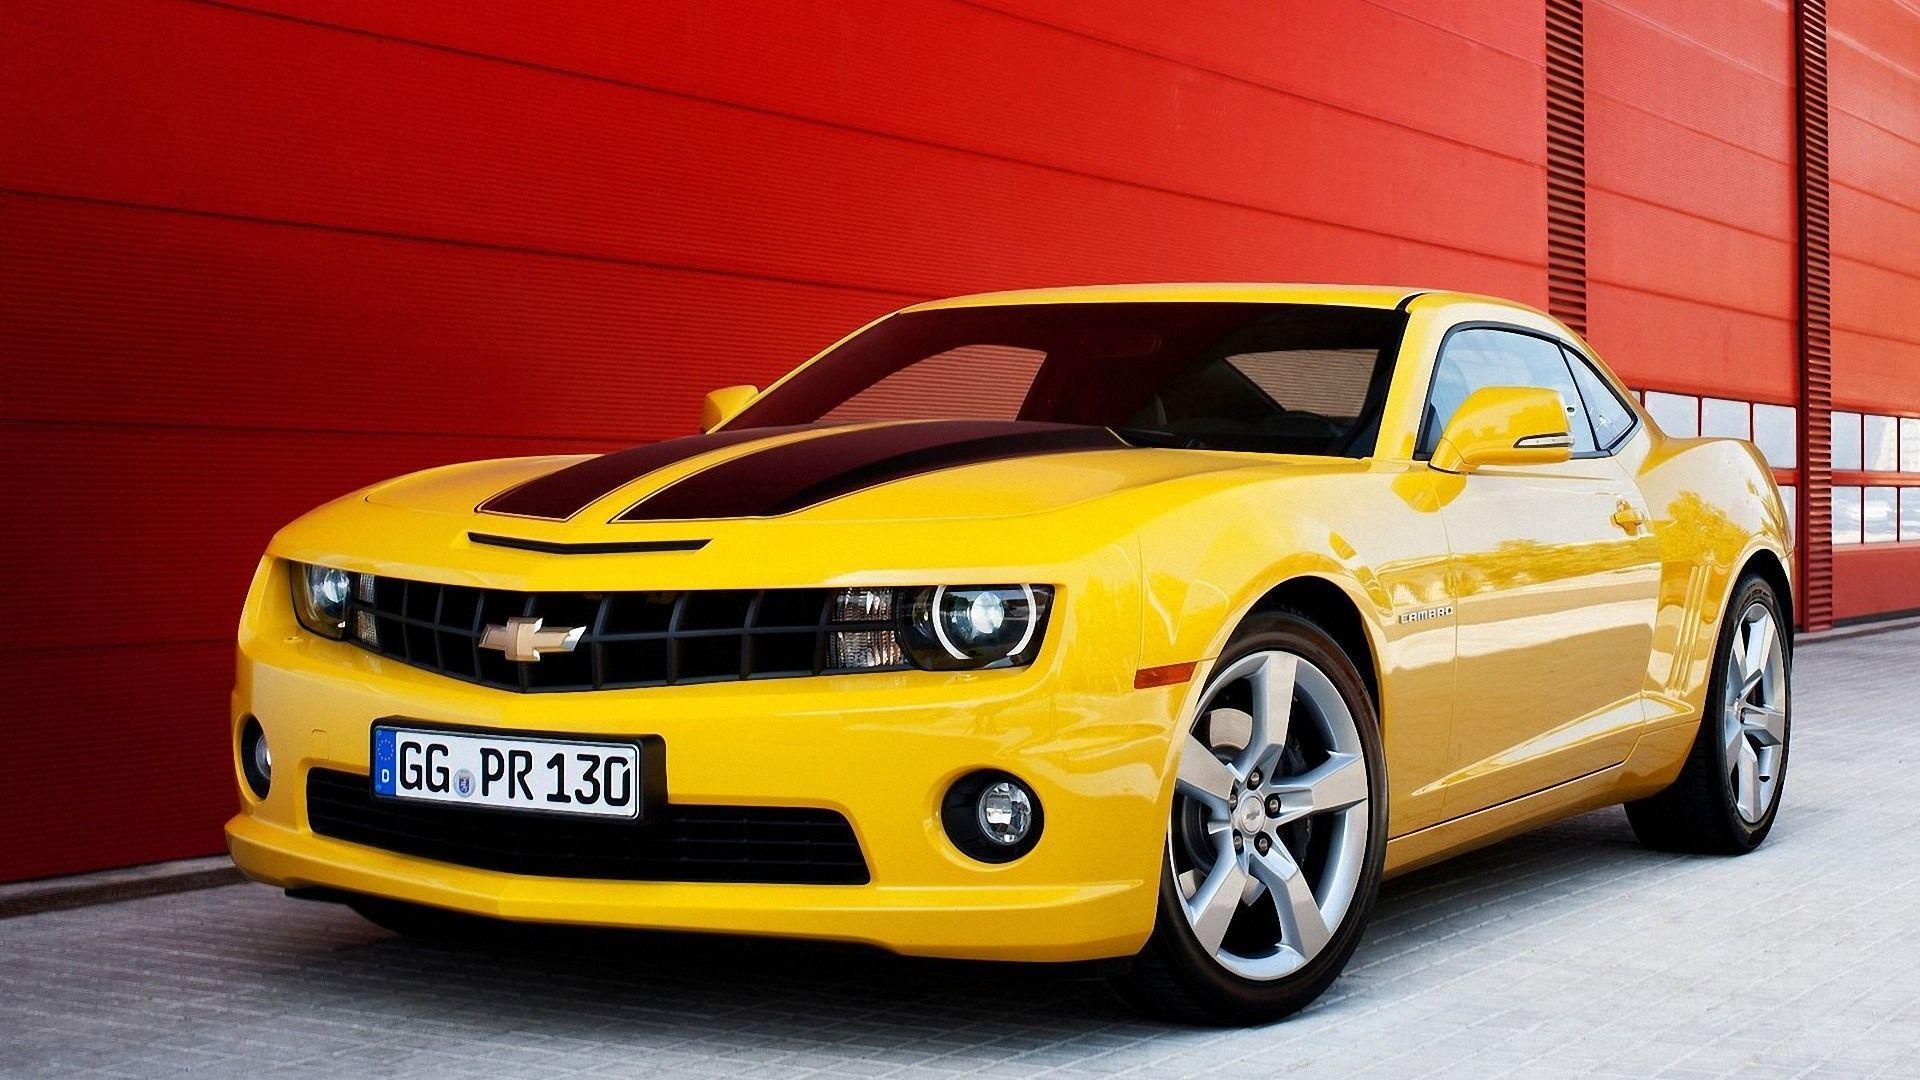 image about Transformers Bumblebee. Chevrolet